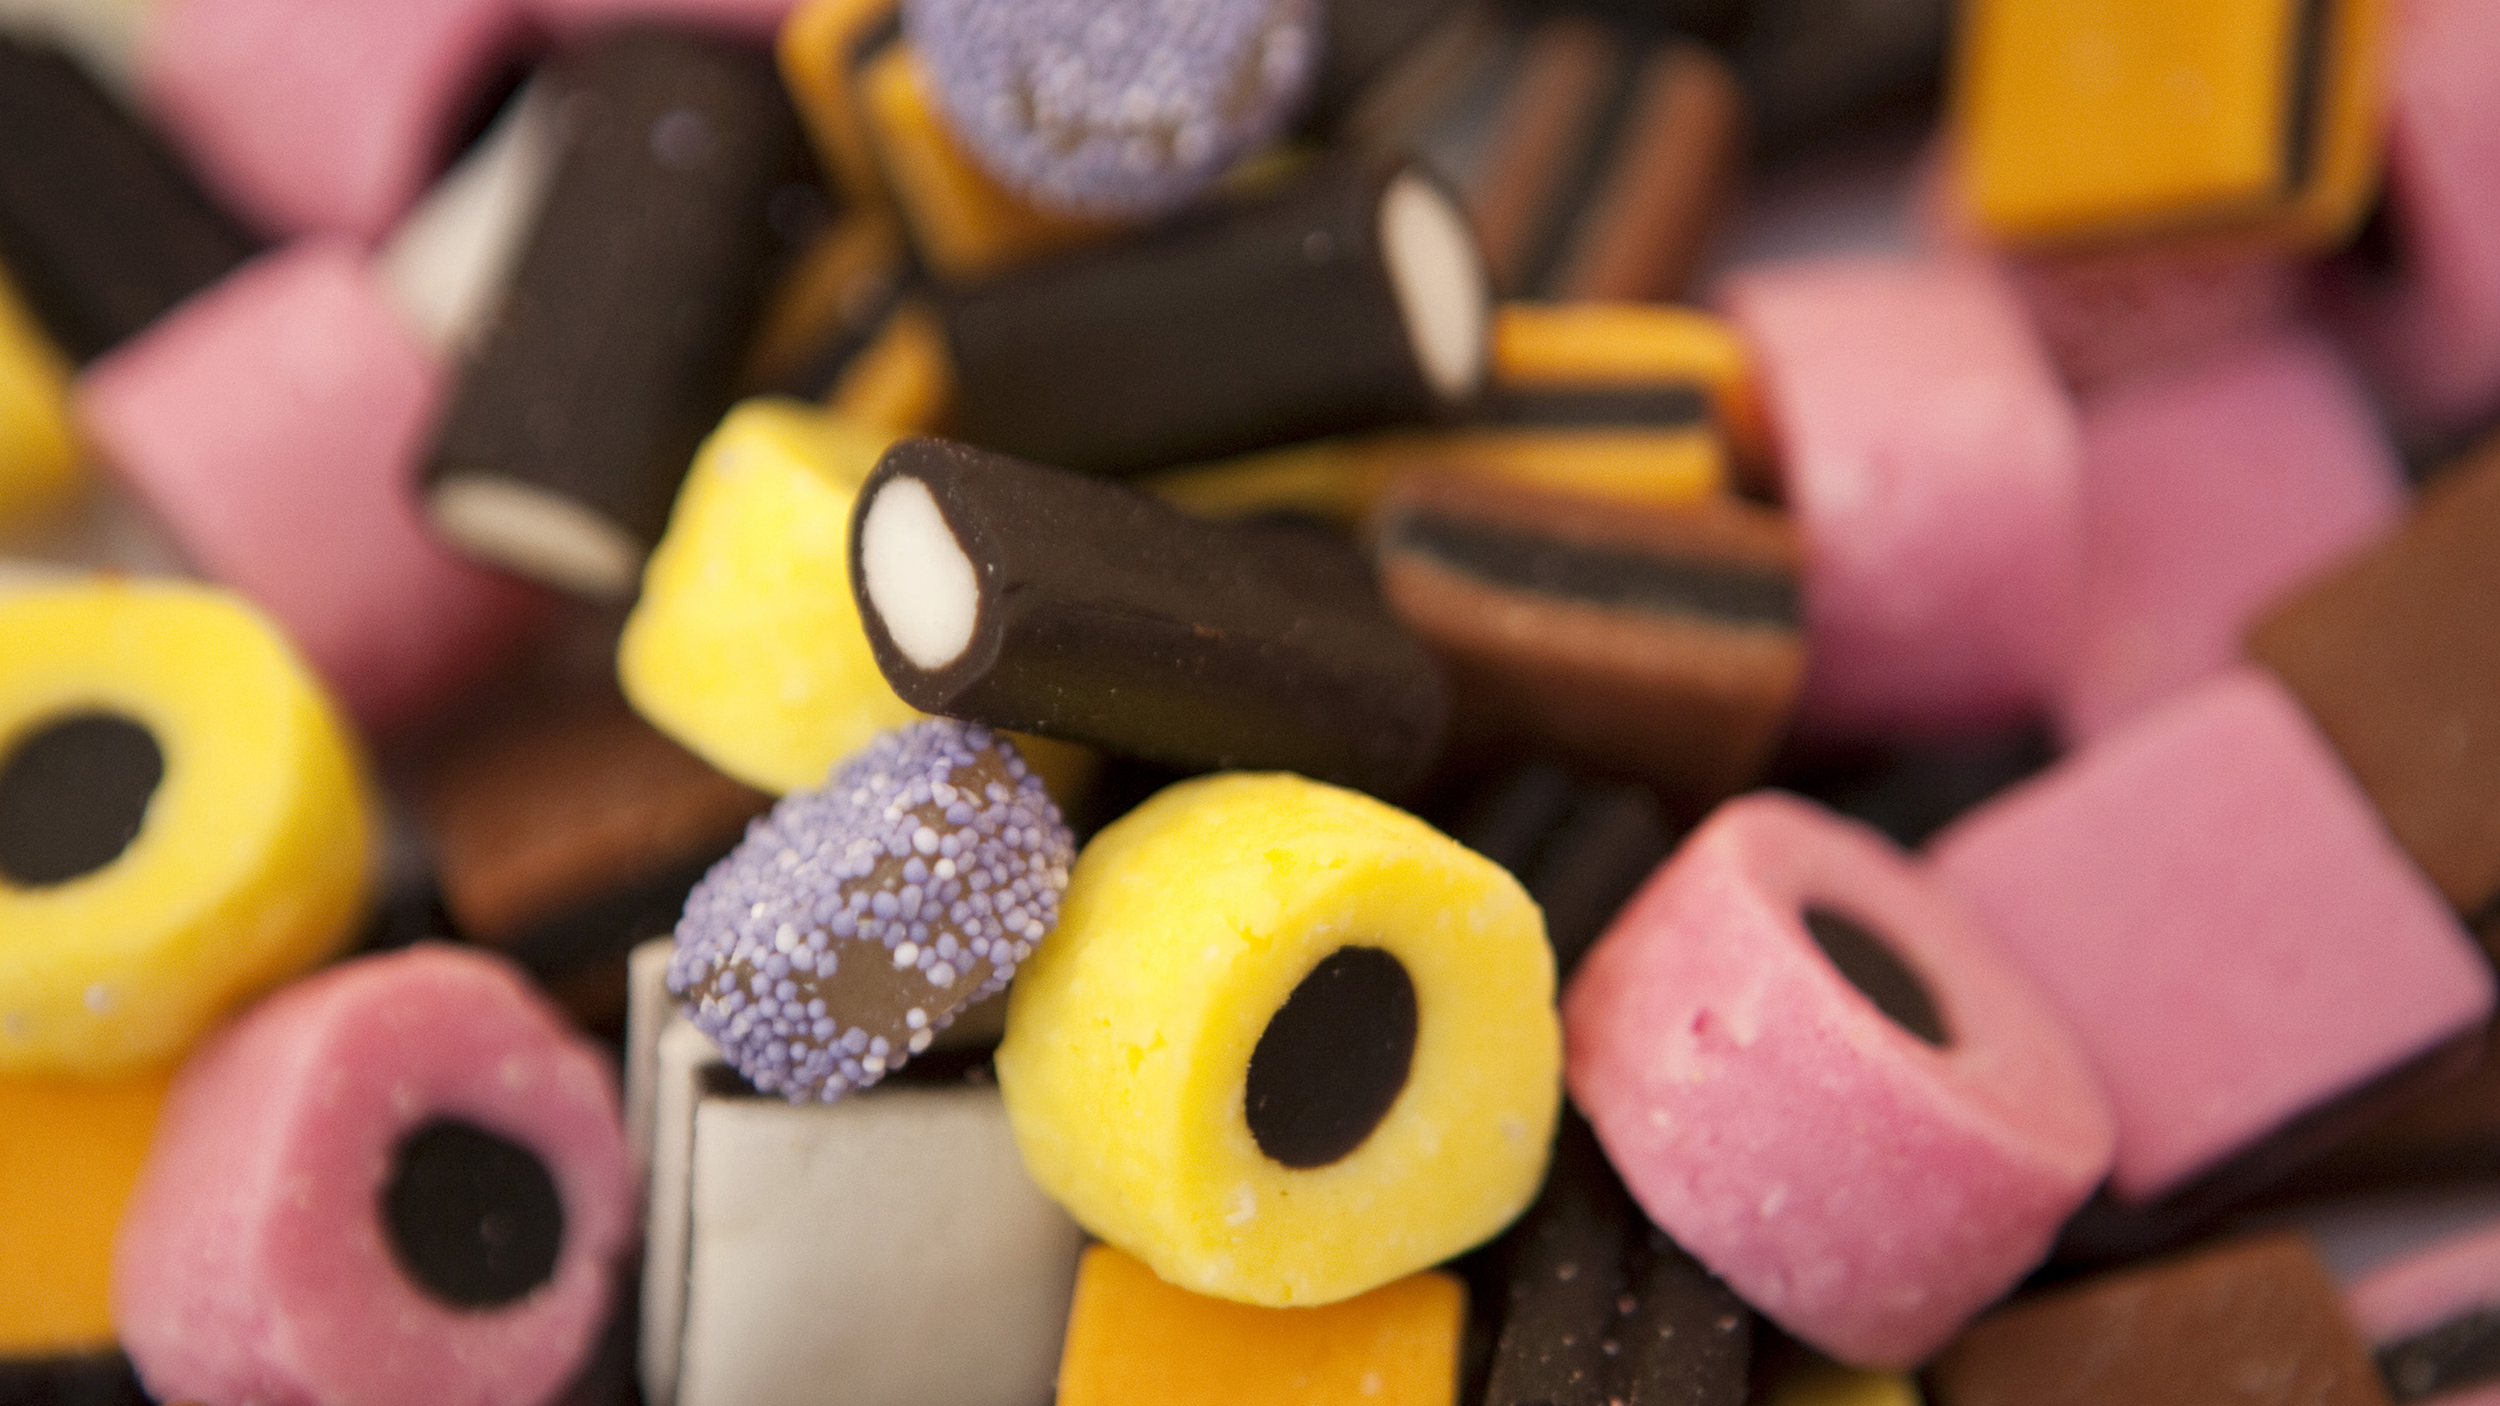 A close up of a pile of different colored candies, including one or two varieties infused with ammonium chloride.